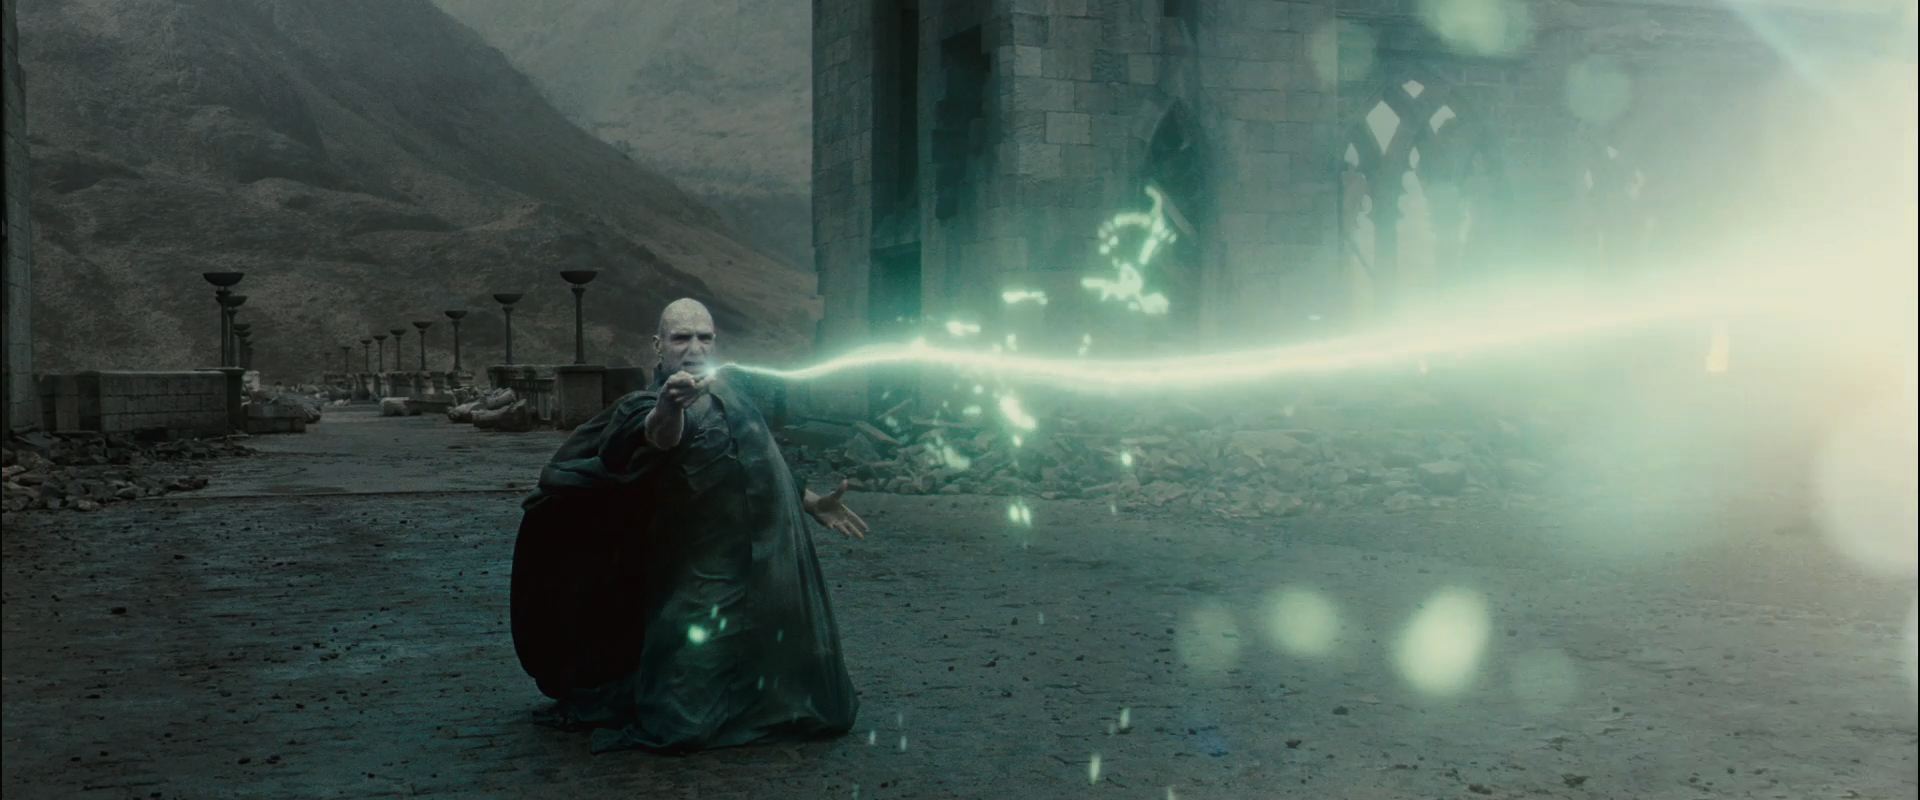 Voldemort Dueling From Harry Potter And The Deathly Hallows Wallpaper